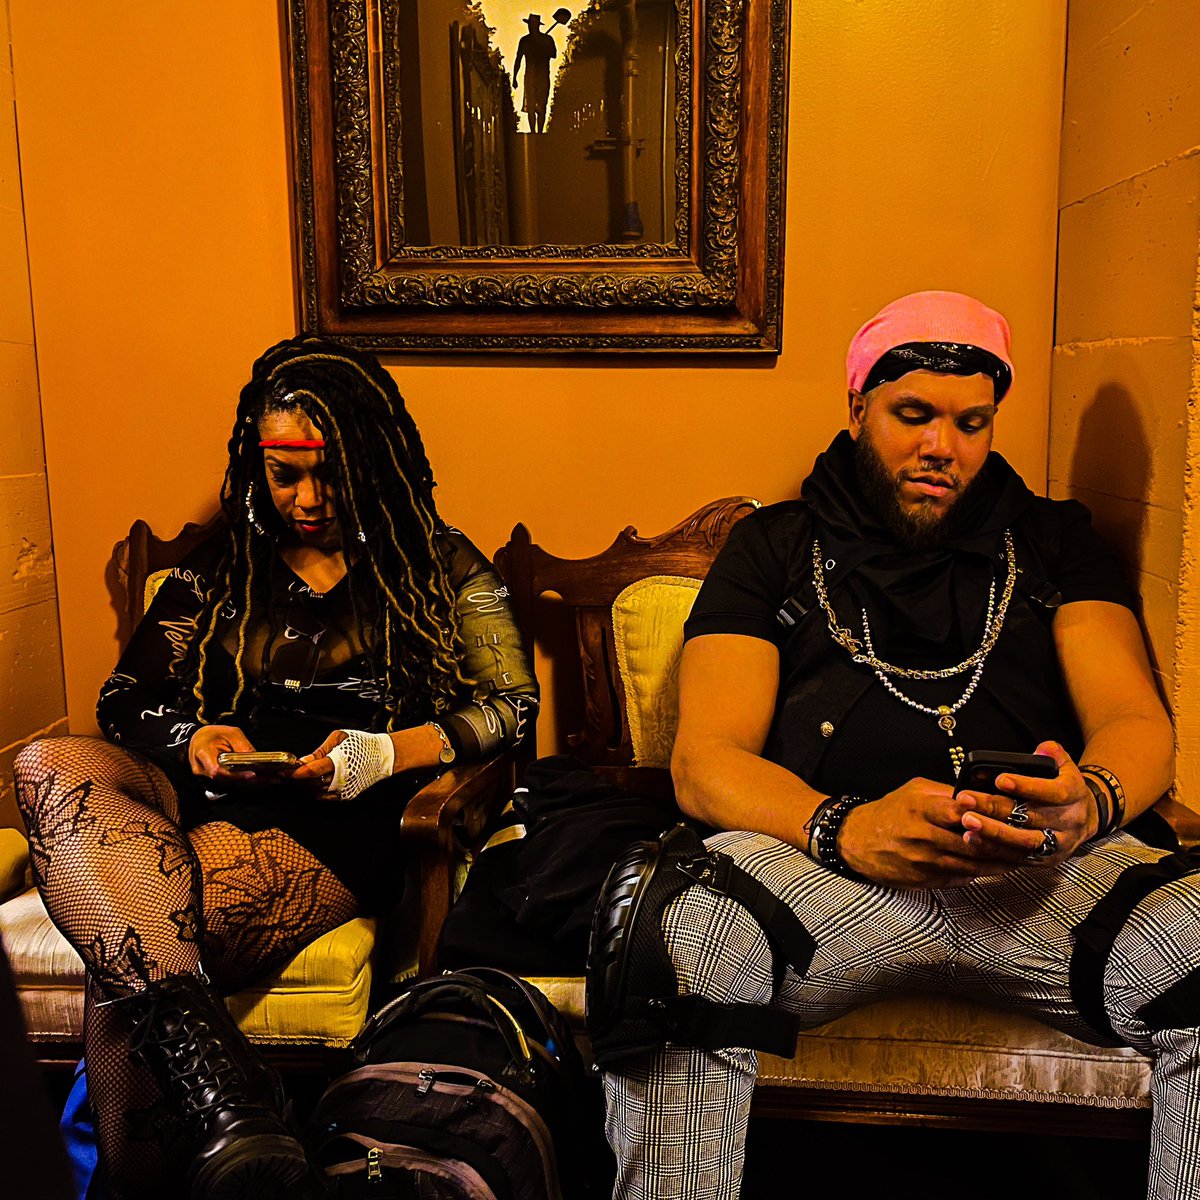 Black Leather and Chains. Greenroom before the show. 
#waterseed #waterseedmusic #futurefunk #funkstar ⁣
.⁣
#stage #backstagelive #backstages #backstage #backstagestories #backstagevideo #concert  #backstagelife #theatre #backstagephotography #backstagesecrets #behindthescenes